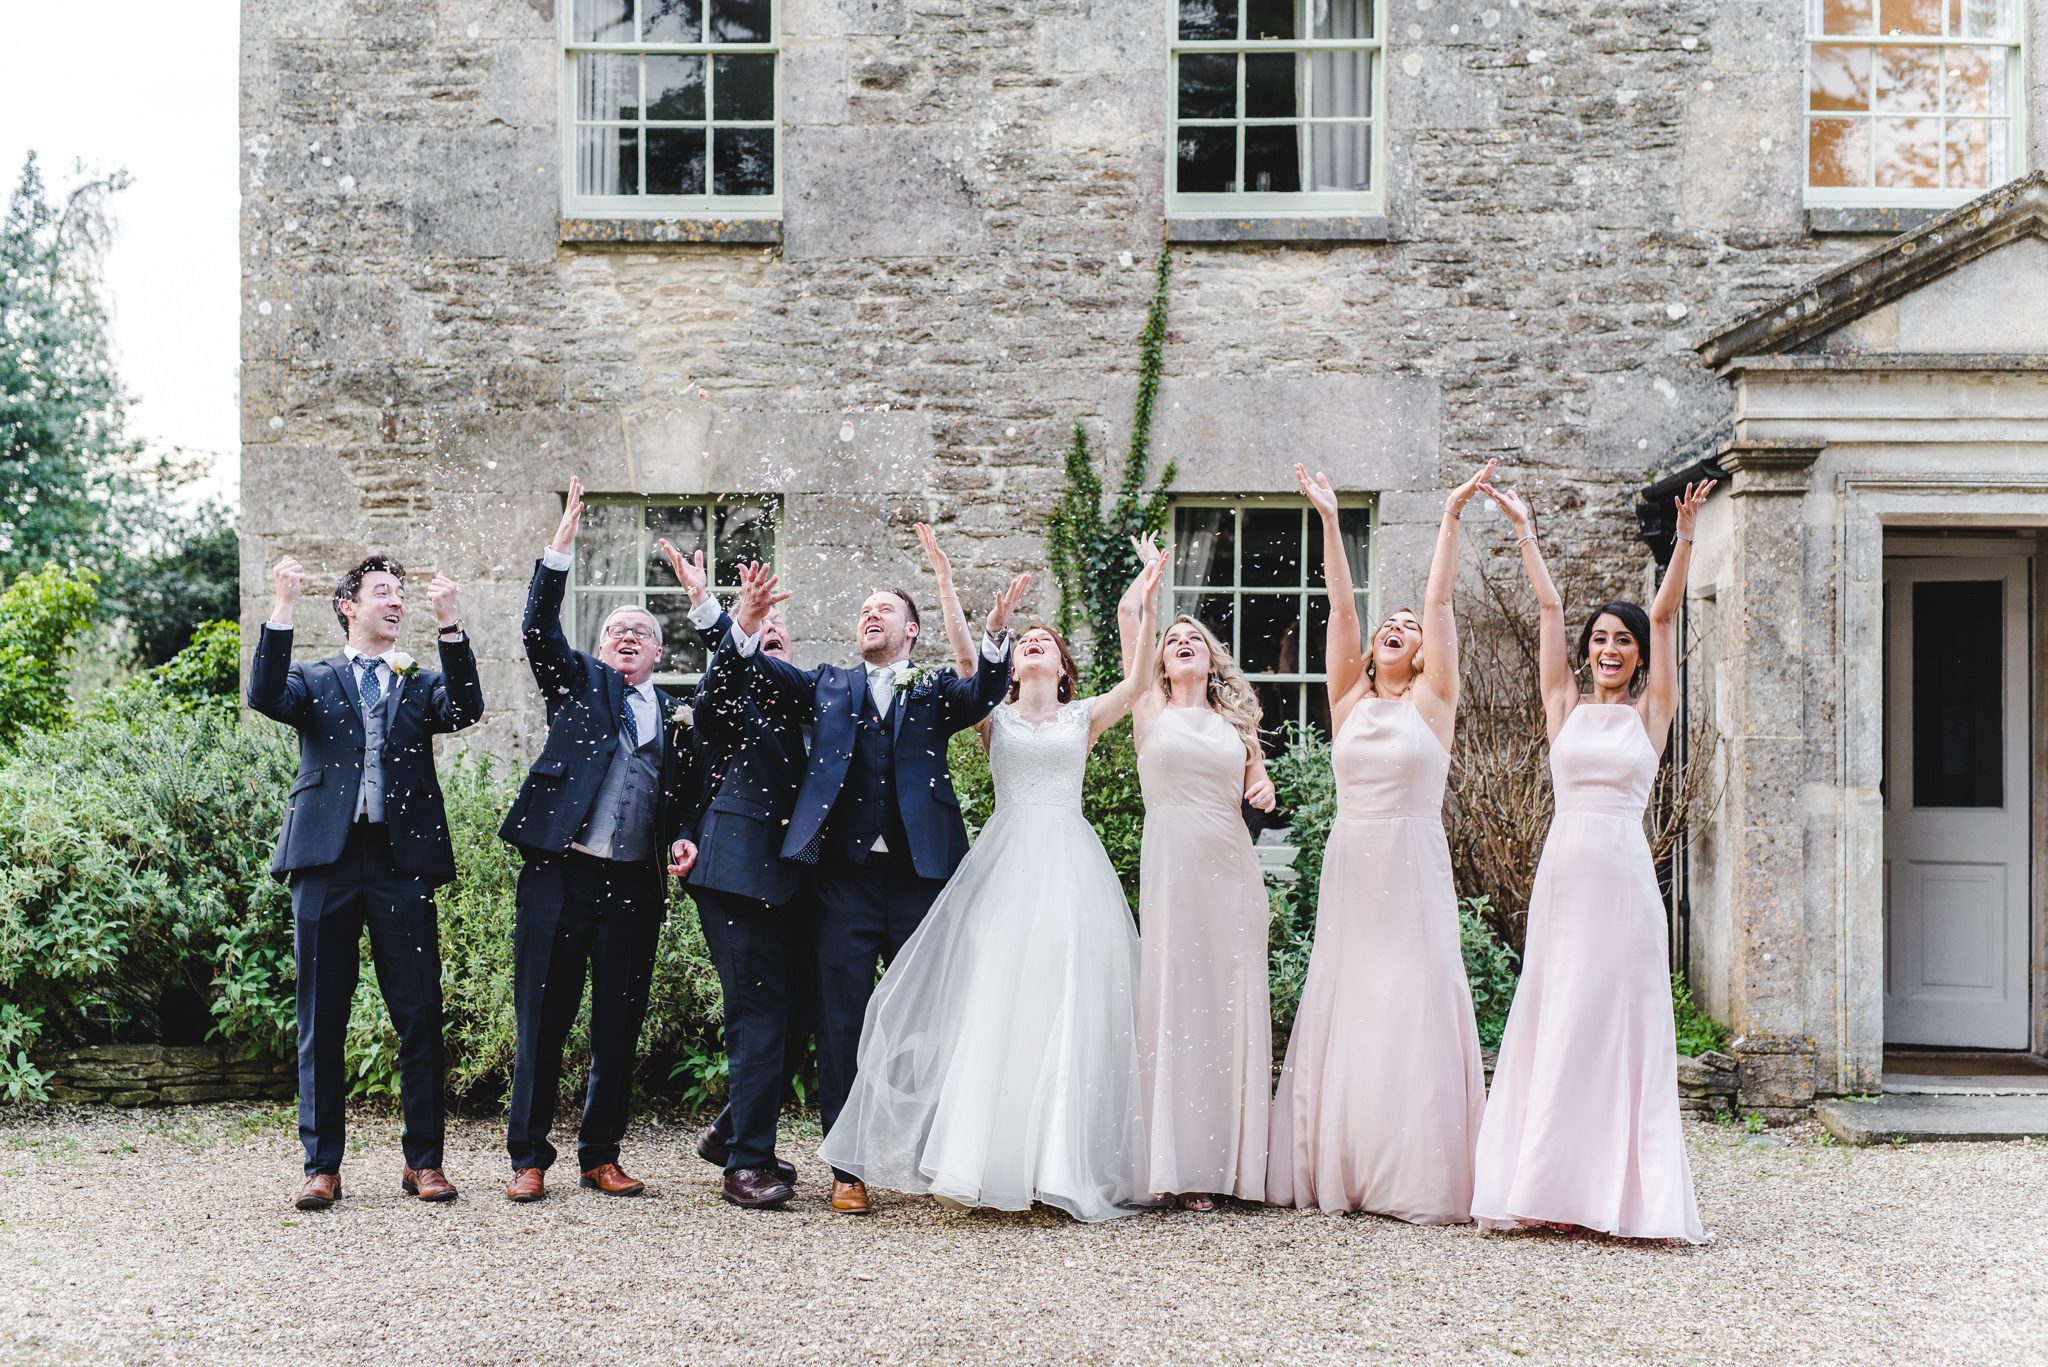 Wedding party throwing confetti outside great tythe house